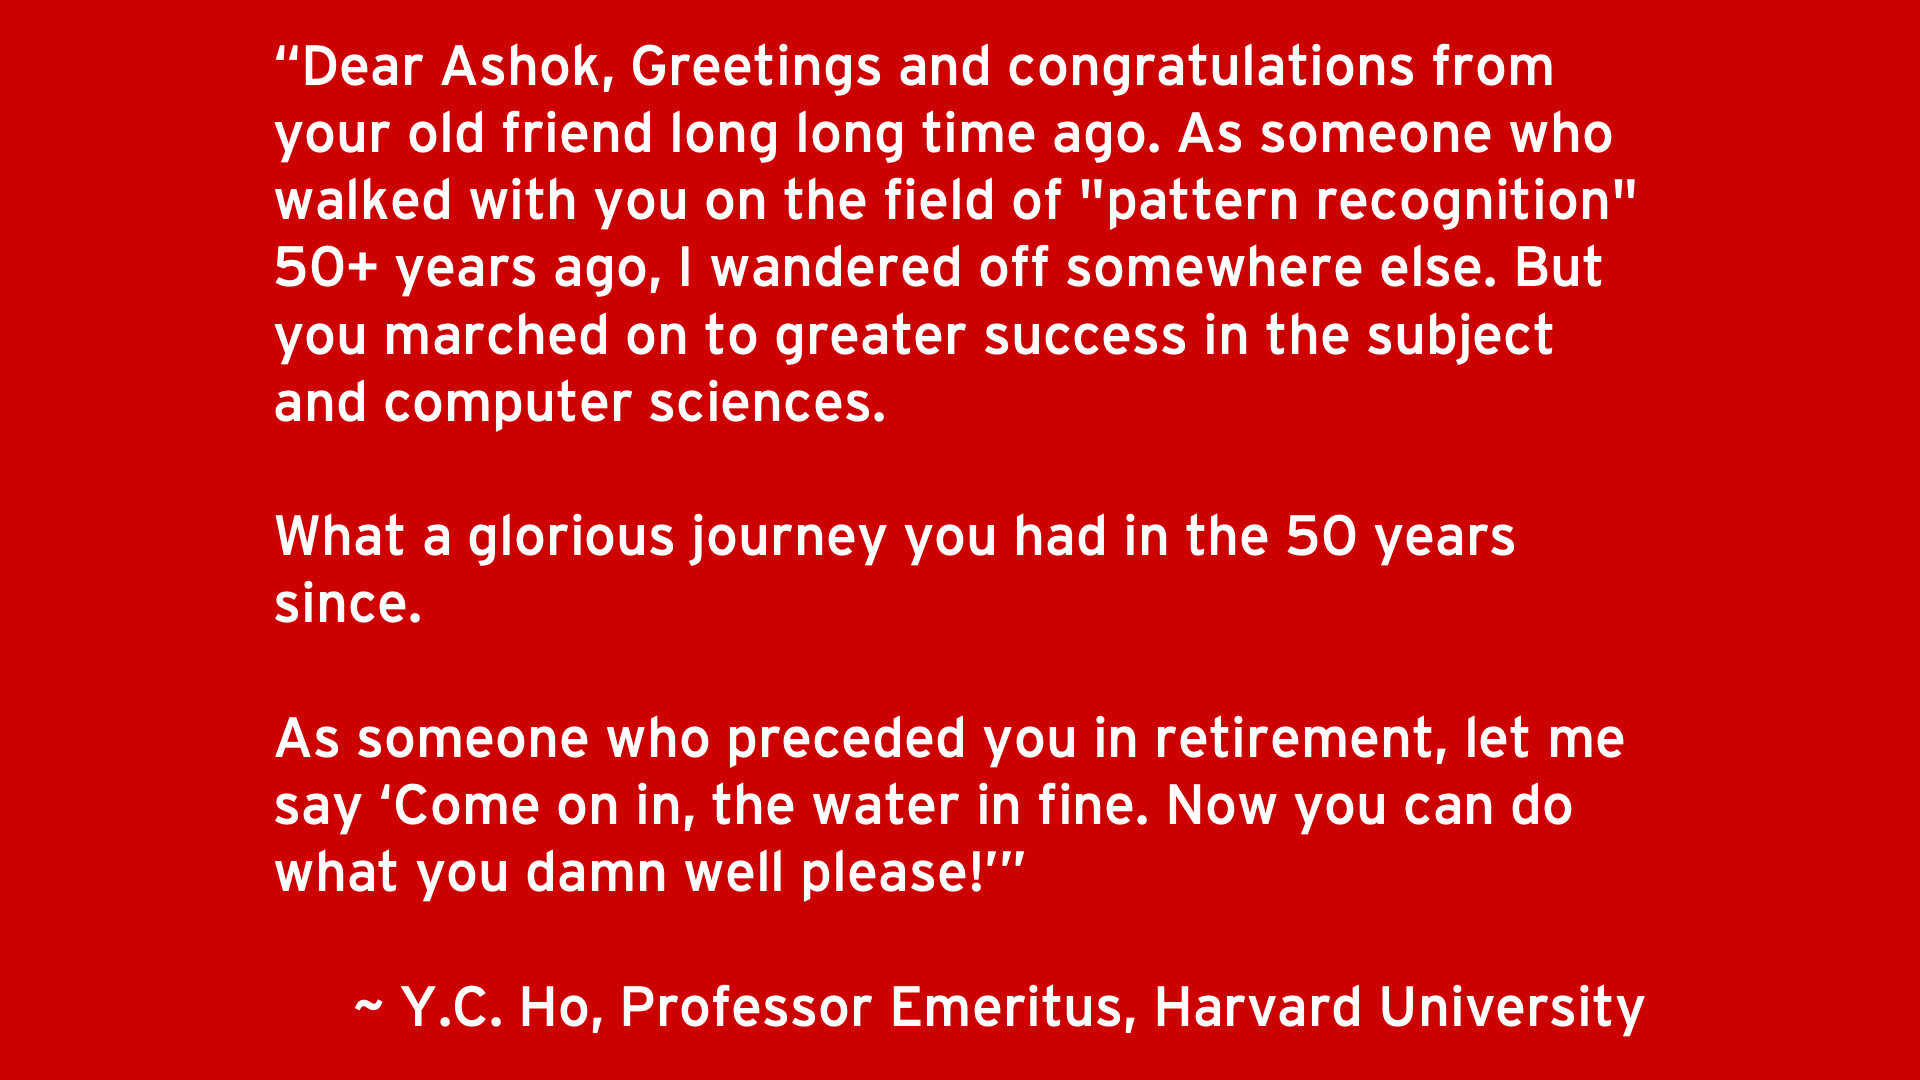 Dear Ashok, Greetings and congratulations from your old friend long long time ago. As someone who walked with you on the field of "pattern recognition" 50+ years ago, I wandered off somewhere else. But you marched on to greater success in the subject and computer sciences.   What a glorious journey you had in the 50 years since.   As someone who preceded you in retirement, let me say ‘Come on in, the water in fine. Now you can do what you damn well please!’